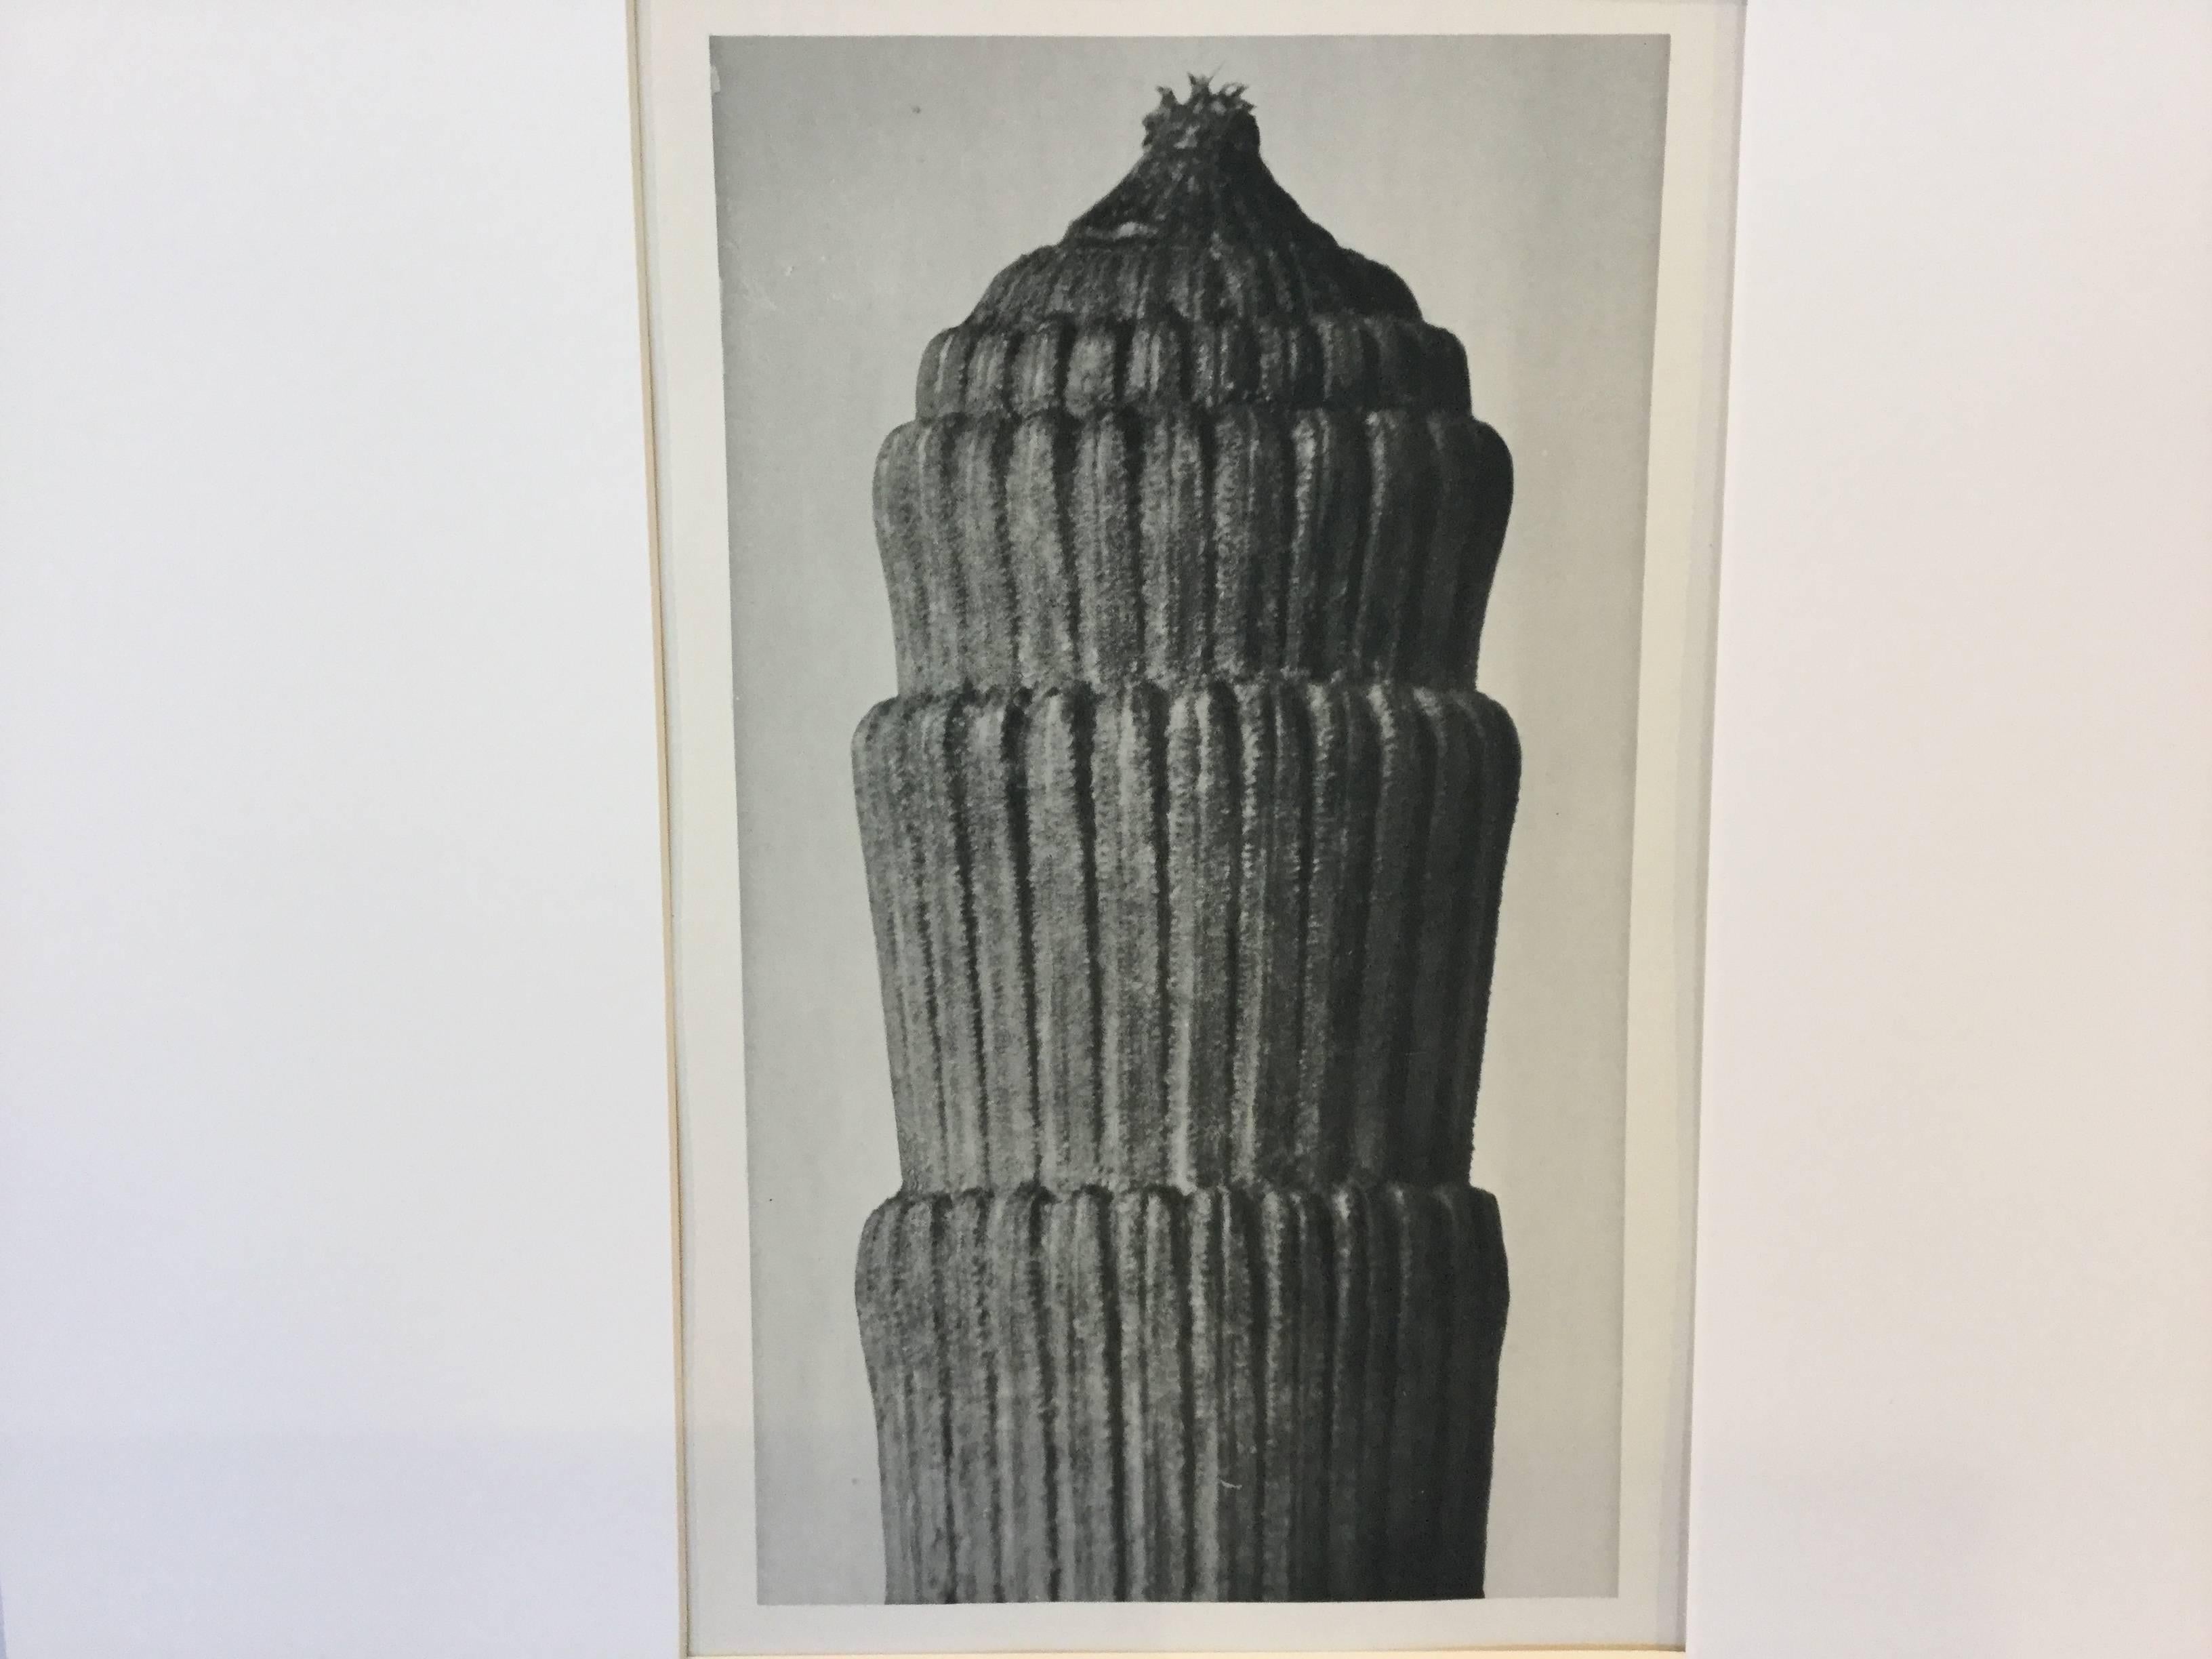 Karl Blossfeldt Photogravure 1st edition, 1928 German edition:  "Equisetum Hyemale (Rough Horsetail)," one of Blossfeldt's most iconic plant images. Archivally matted.